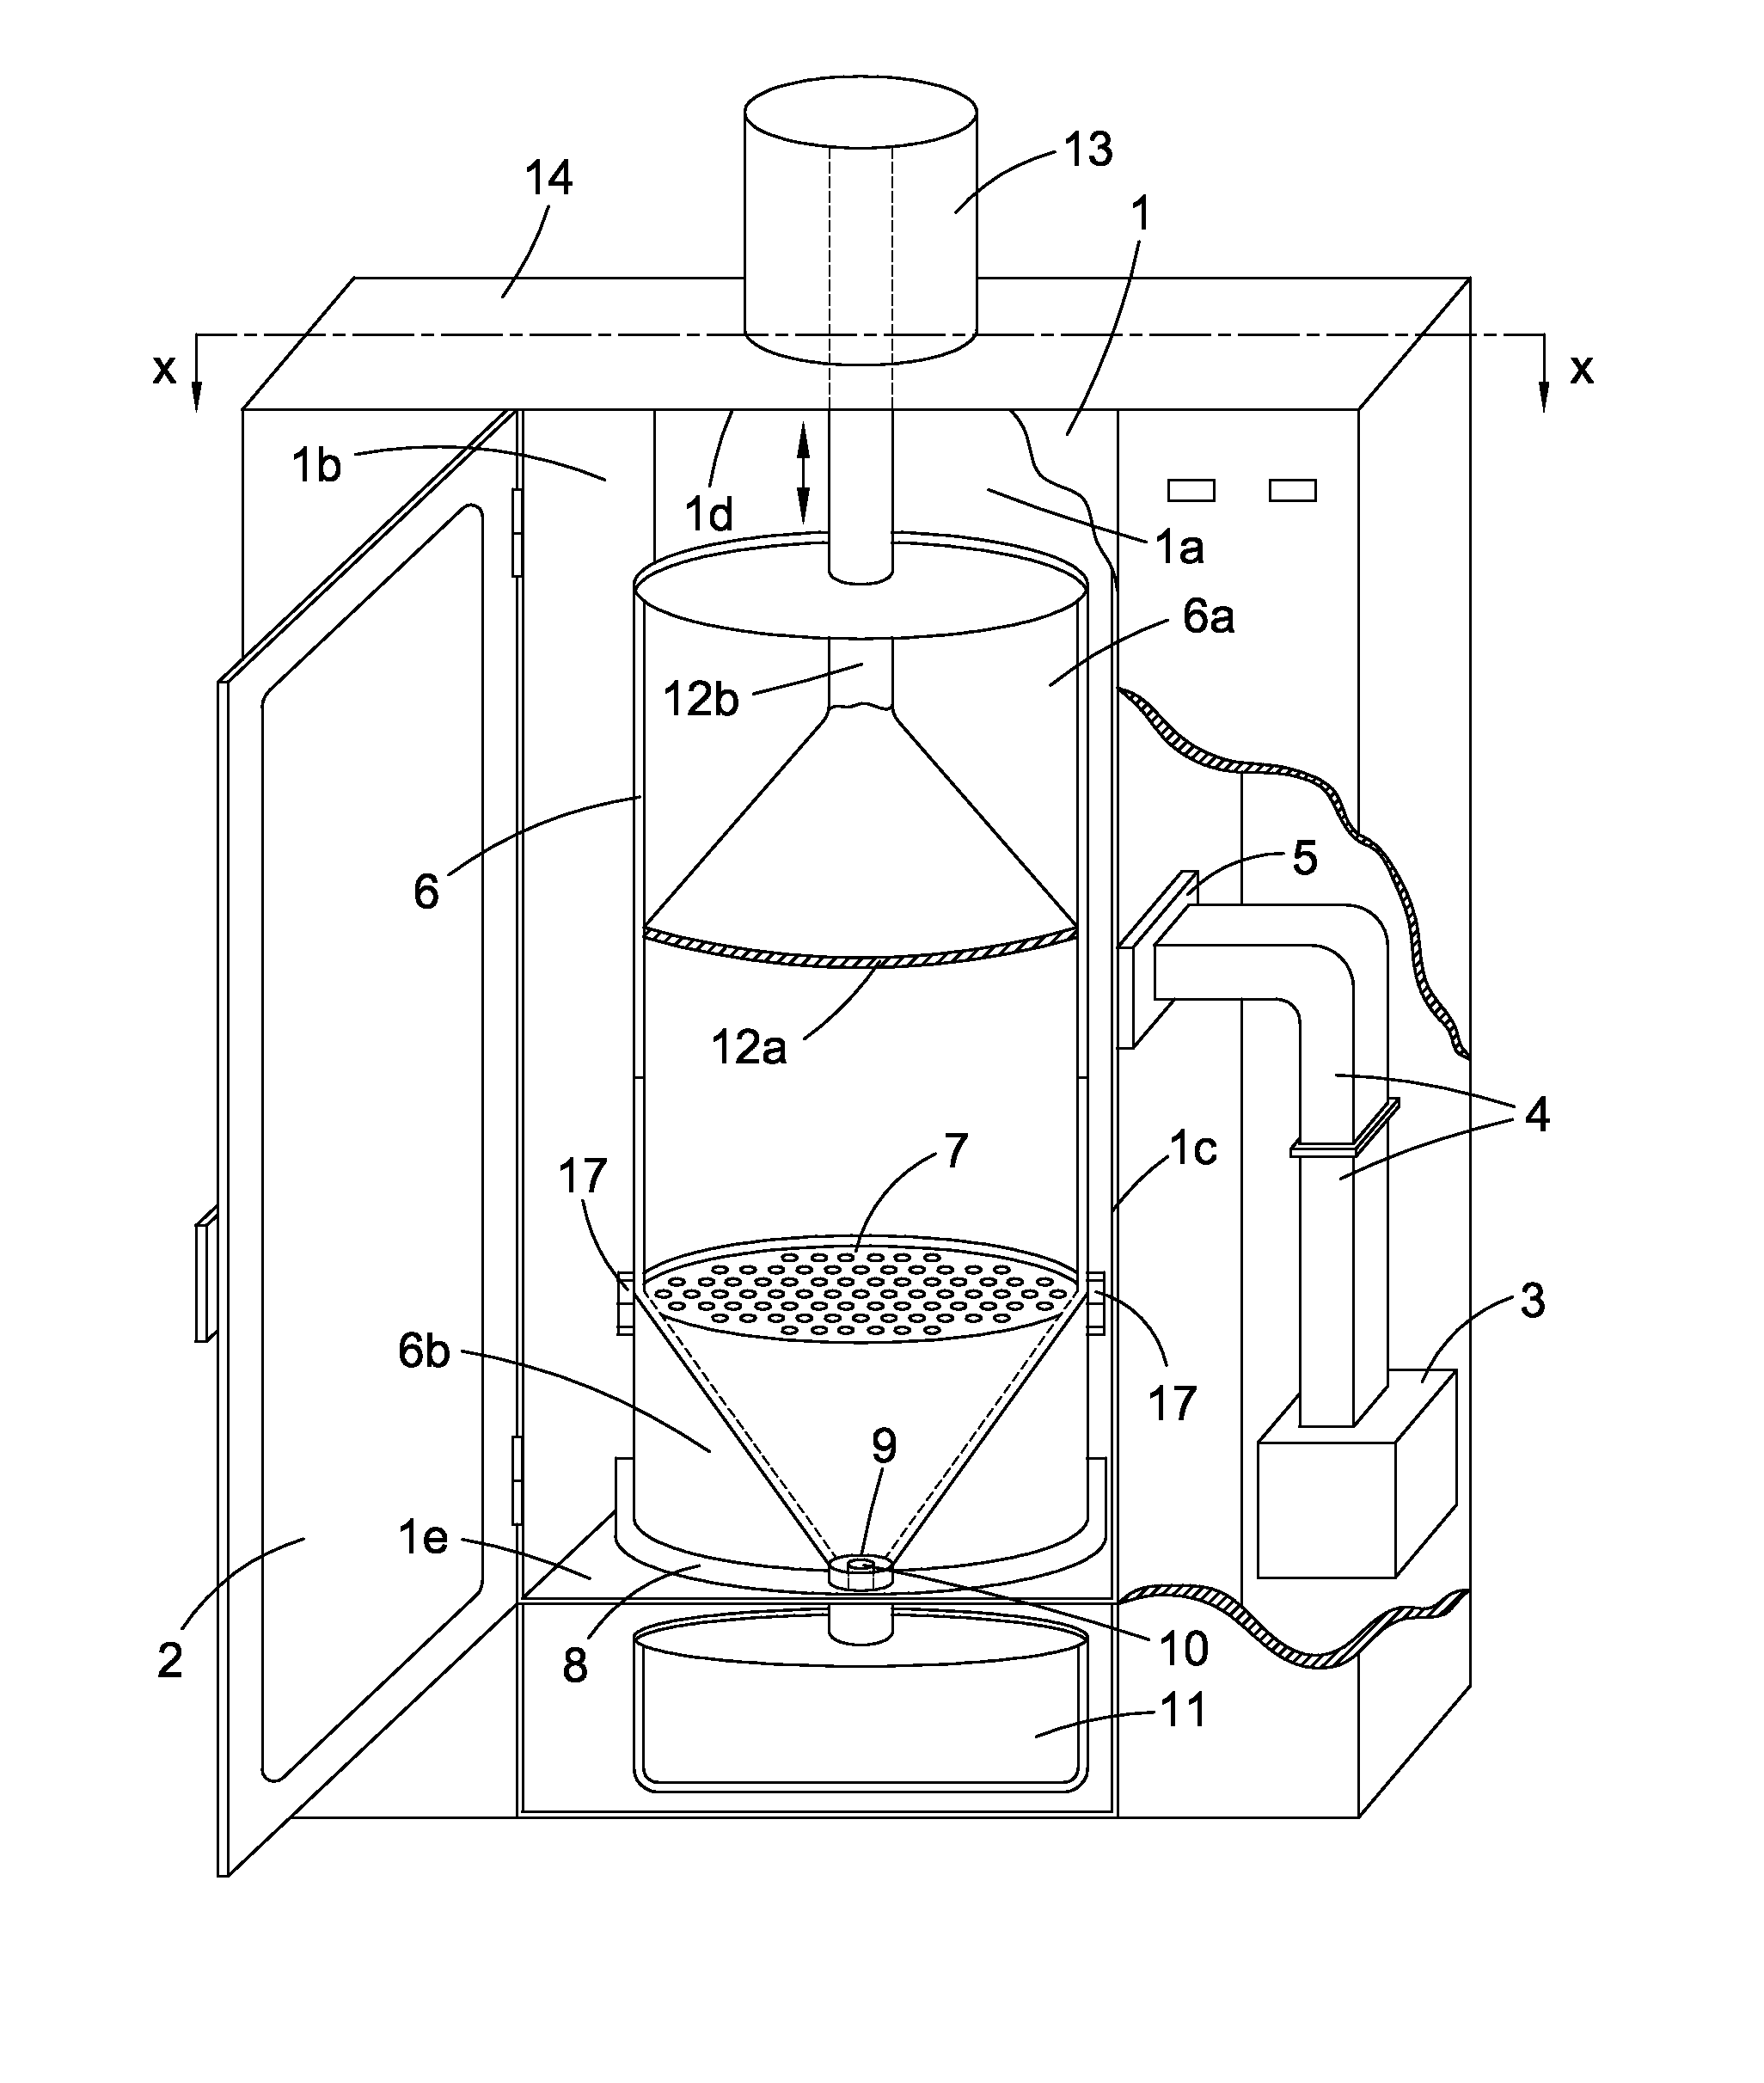 Microwave press extraction apparatus